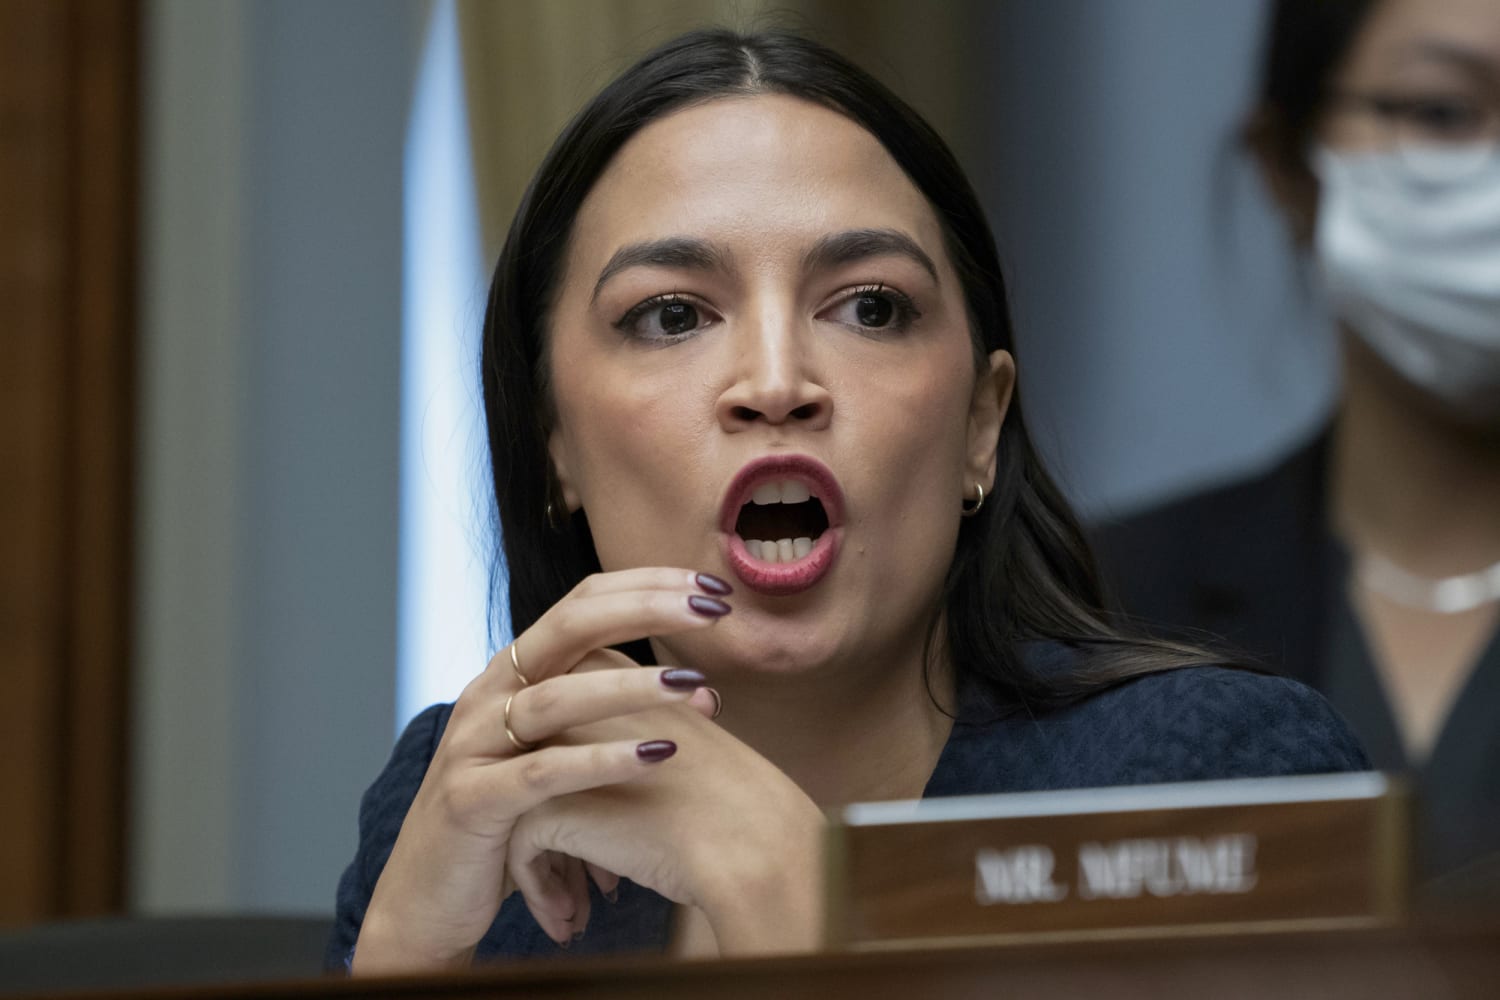 Rep. Ocasio-Cortez blasts Republicans for vote to oust Ilhan Omar from committee